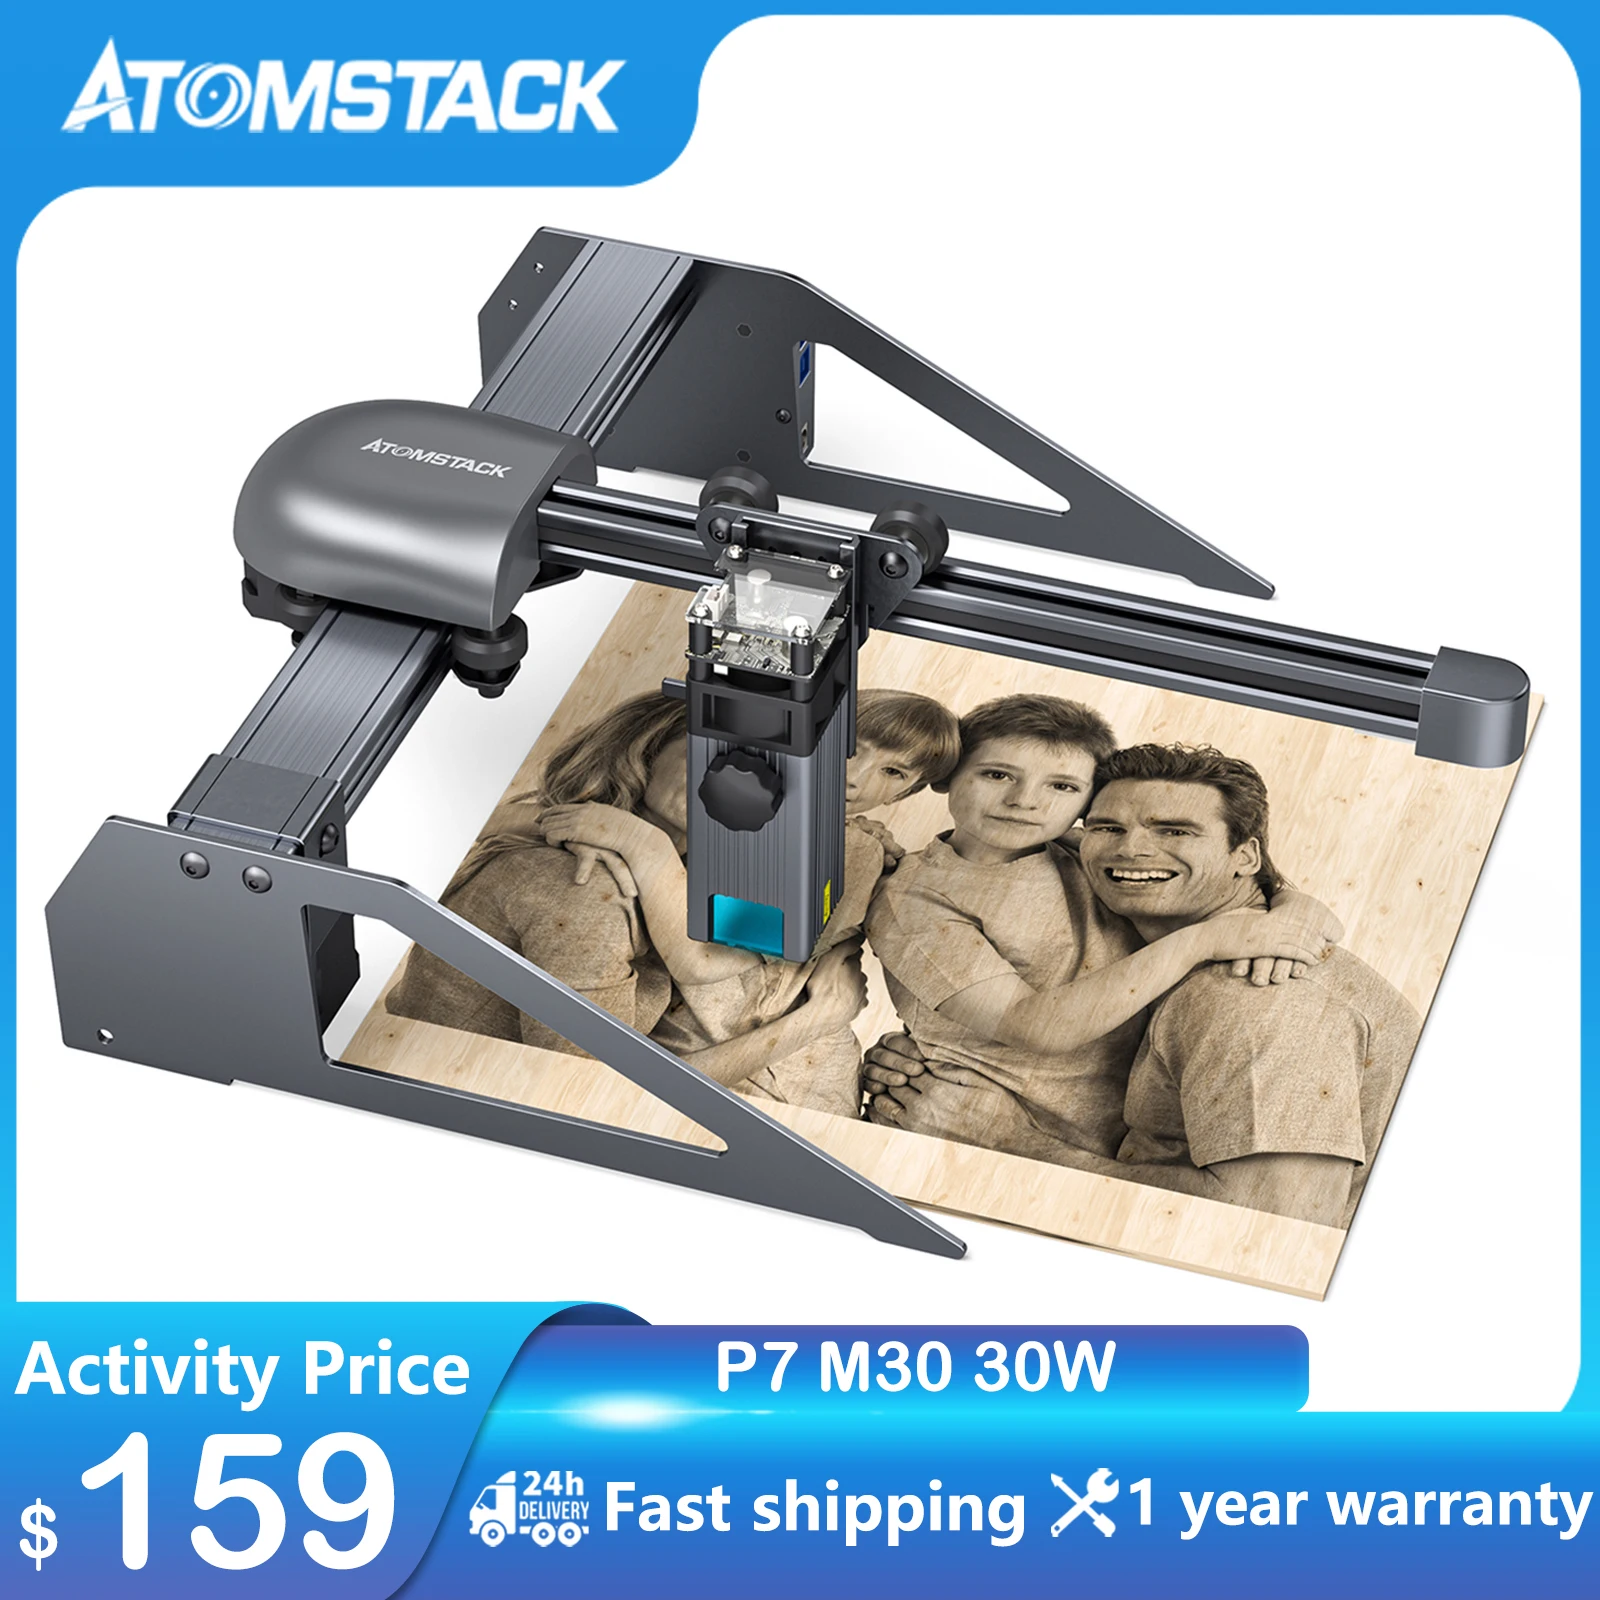 ATOMSTACK P7 M30 30W Laser Engraver Portable Laser Engraving Machine for Woodworking Wood Mini Dog Tags Mark